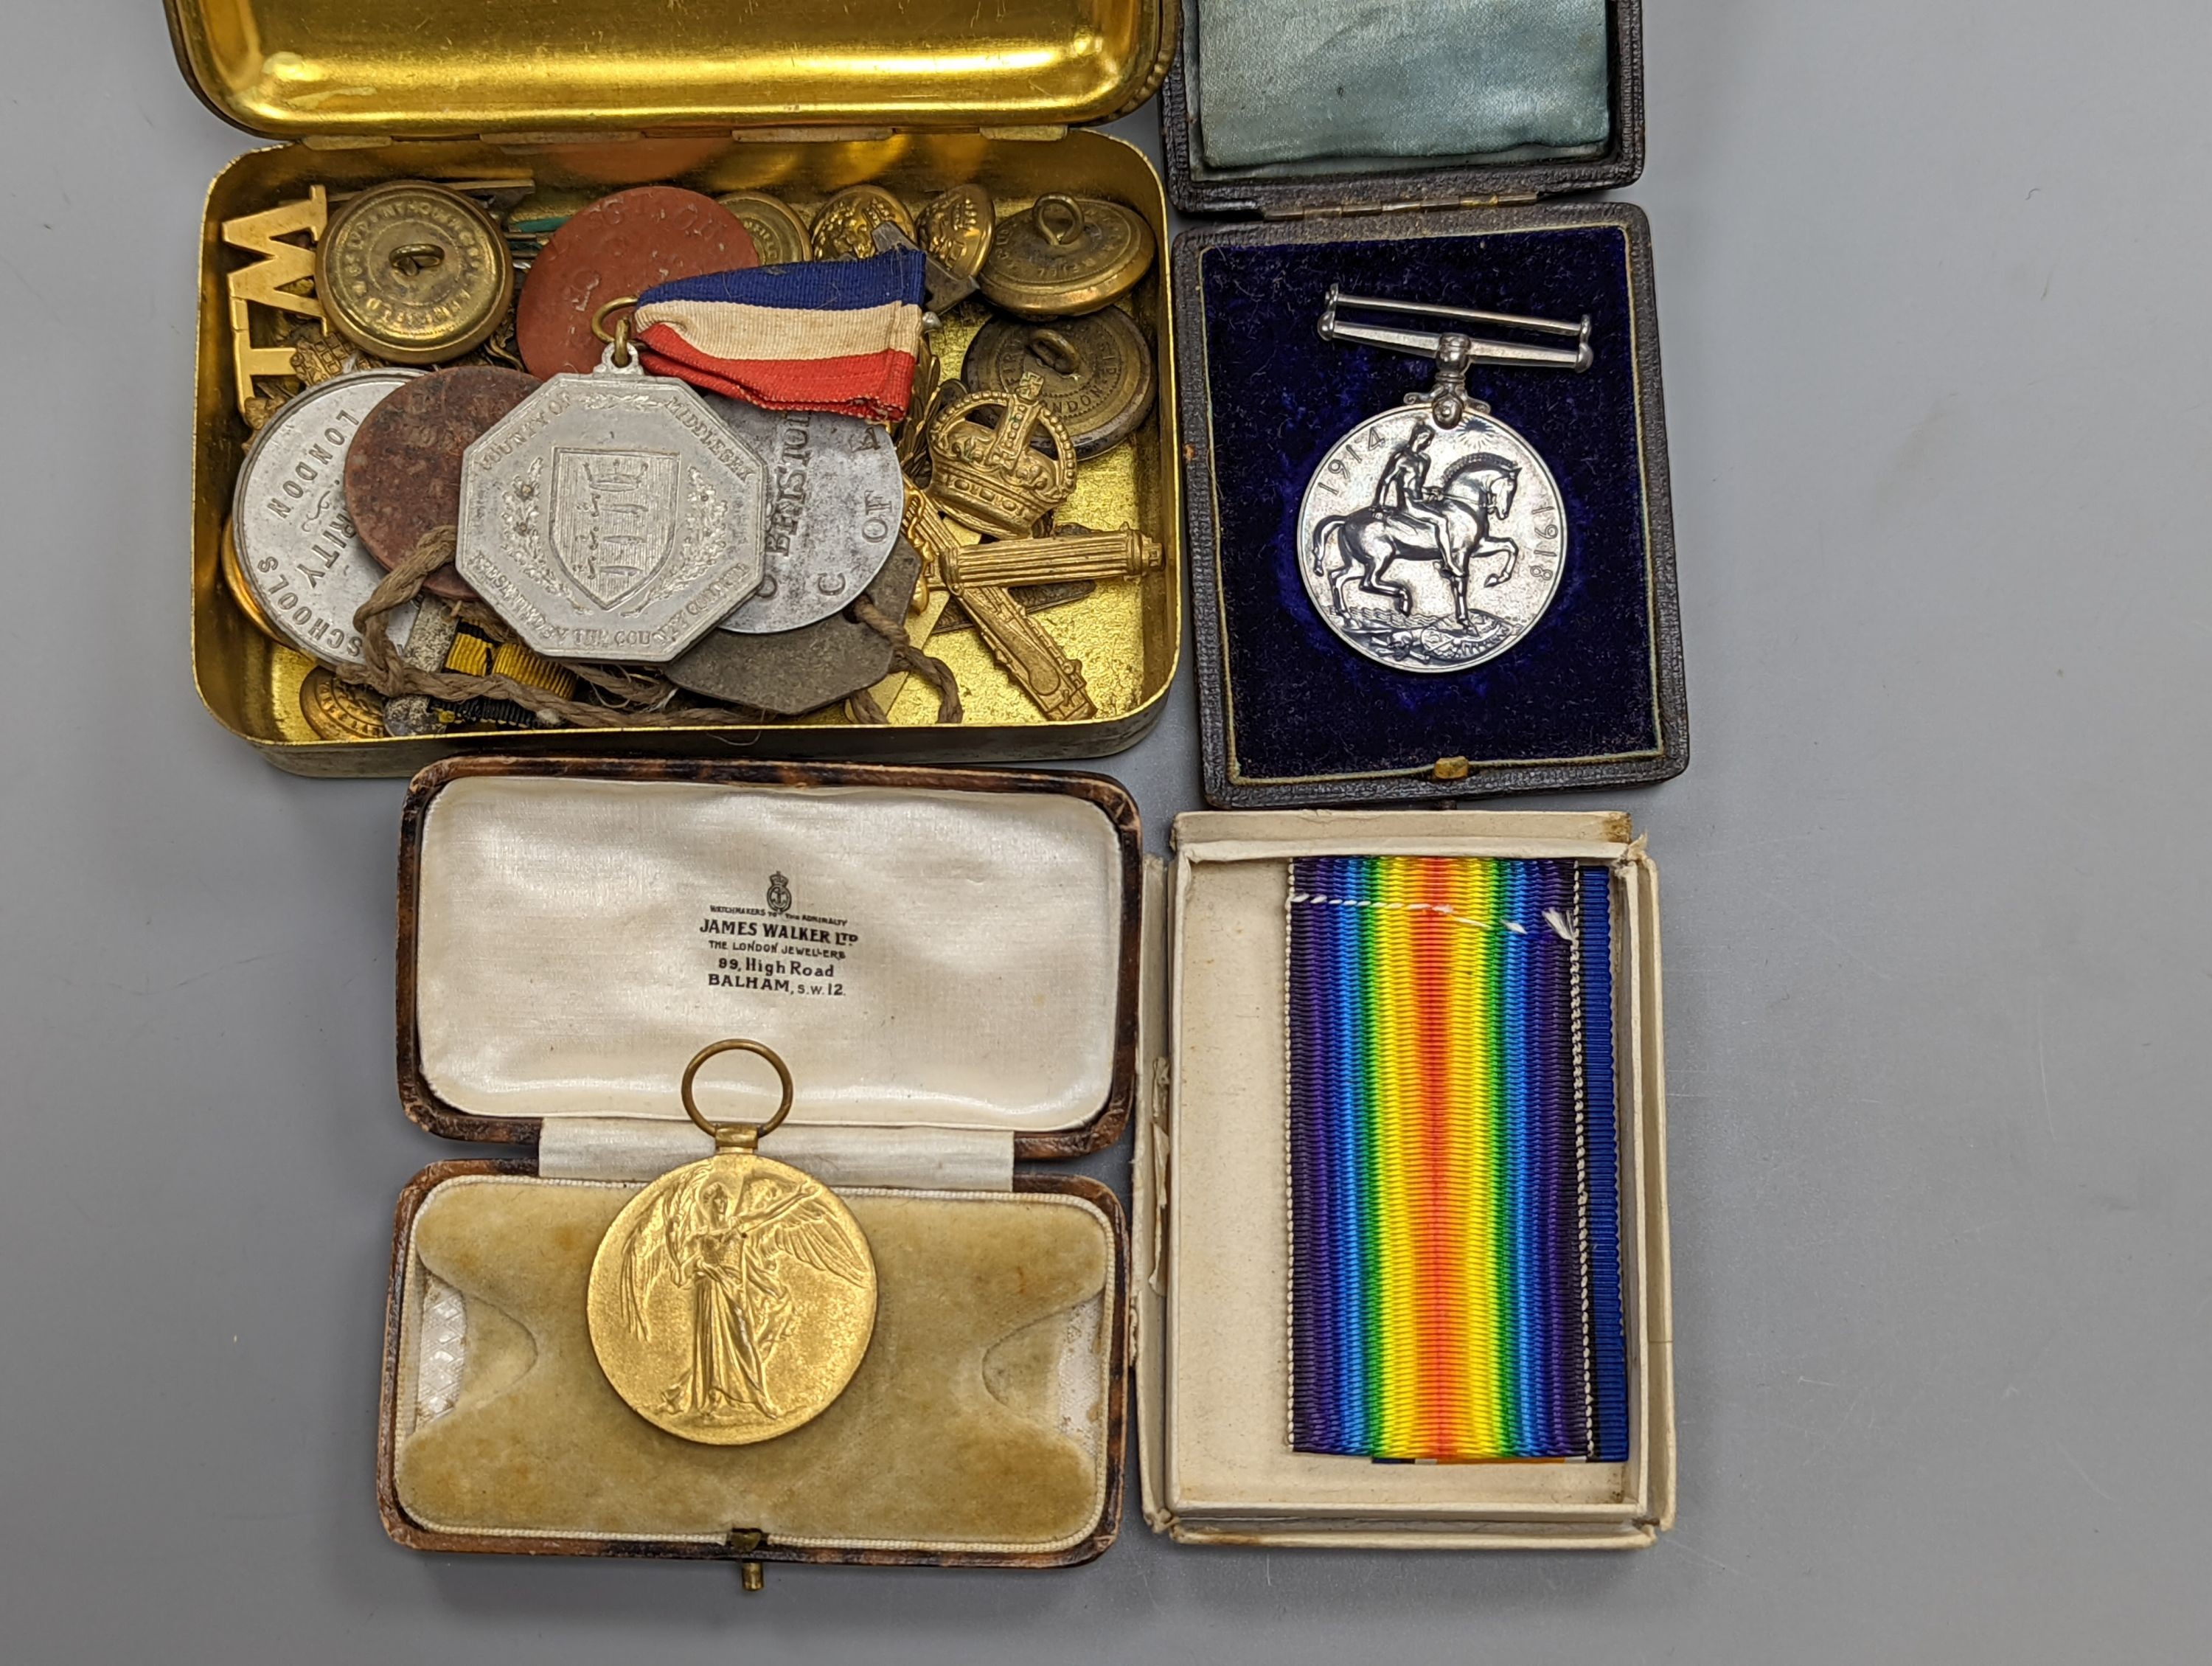 A WW1 pair to 1748 SJT. O.H.BRISTOL 2- CO. OF LOND, Y. and Related Badges, buttons, dog tags and other medals